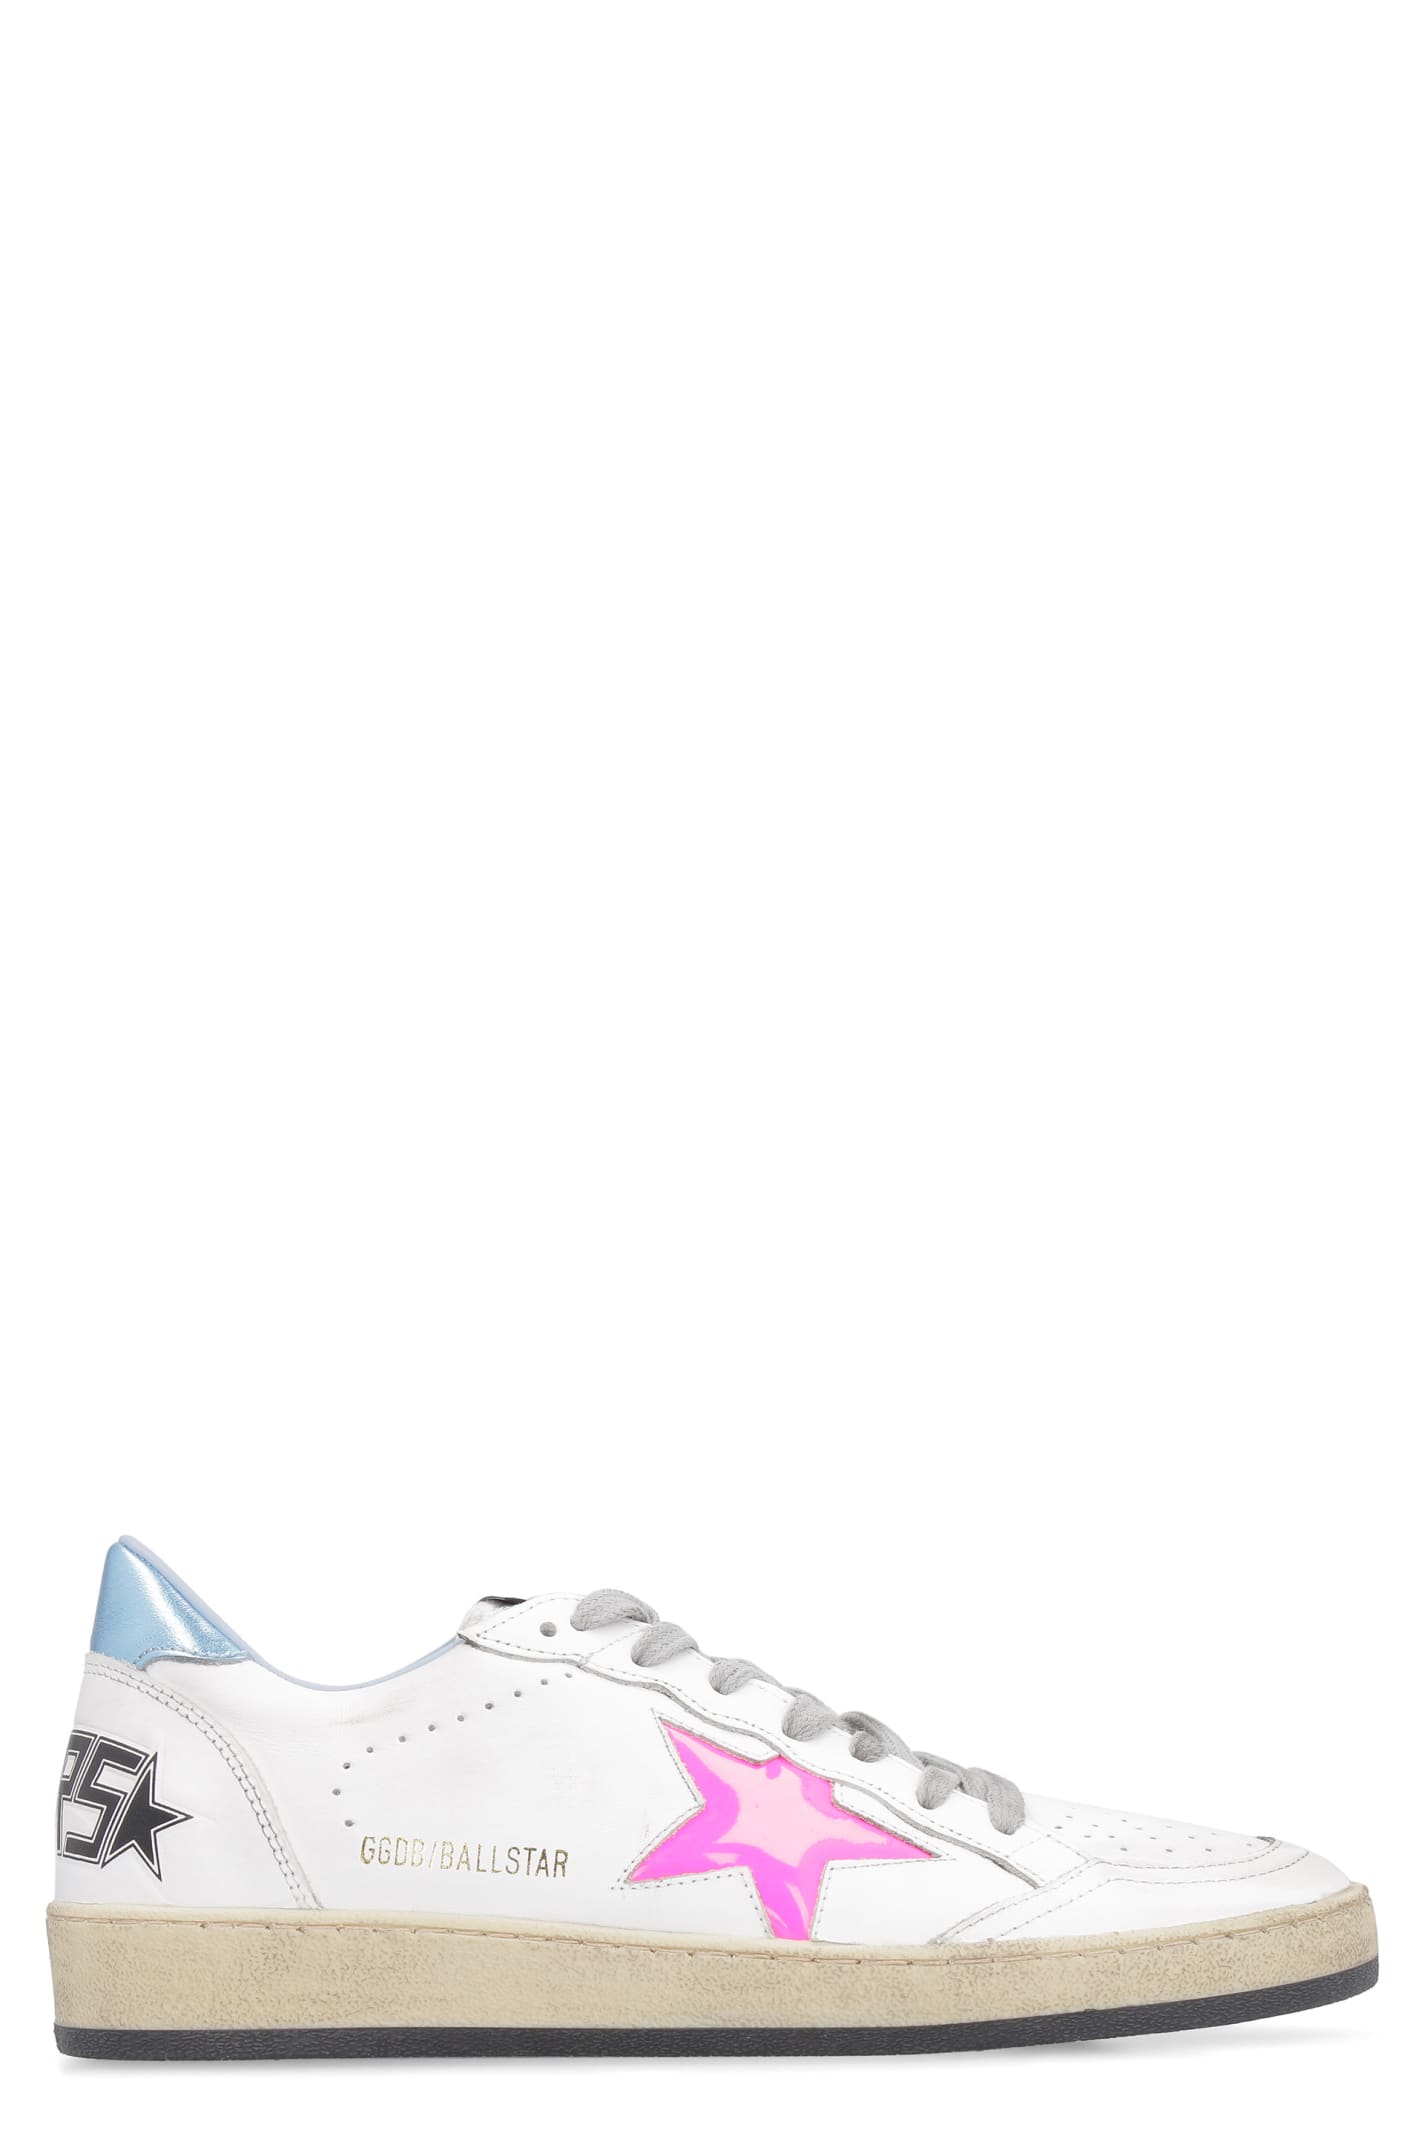 GOLDEN GOOSE BALL STAR LEATHER trainers,11141325